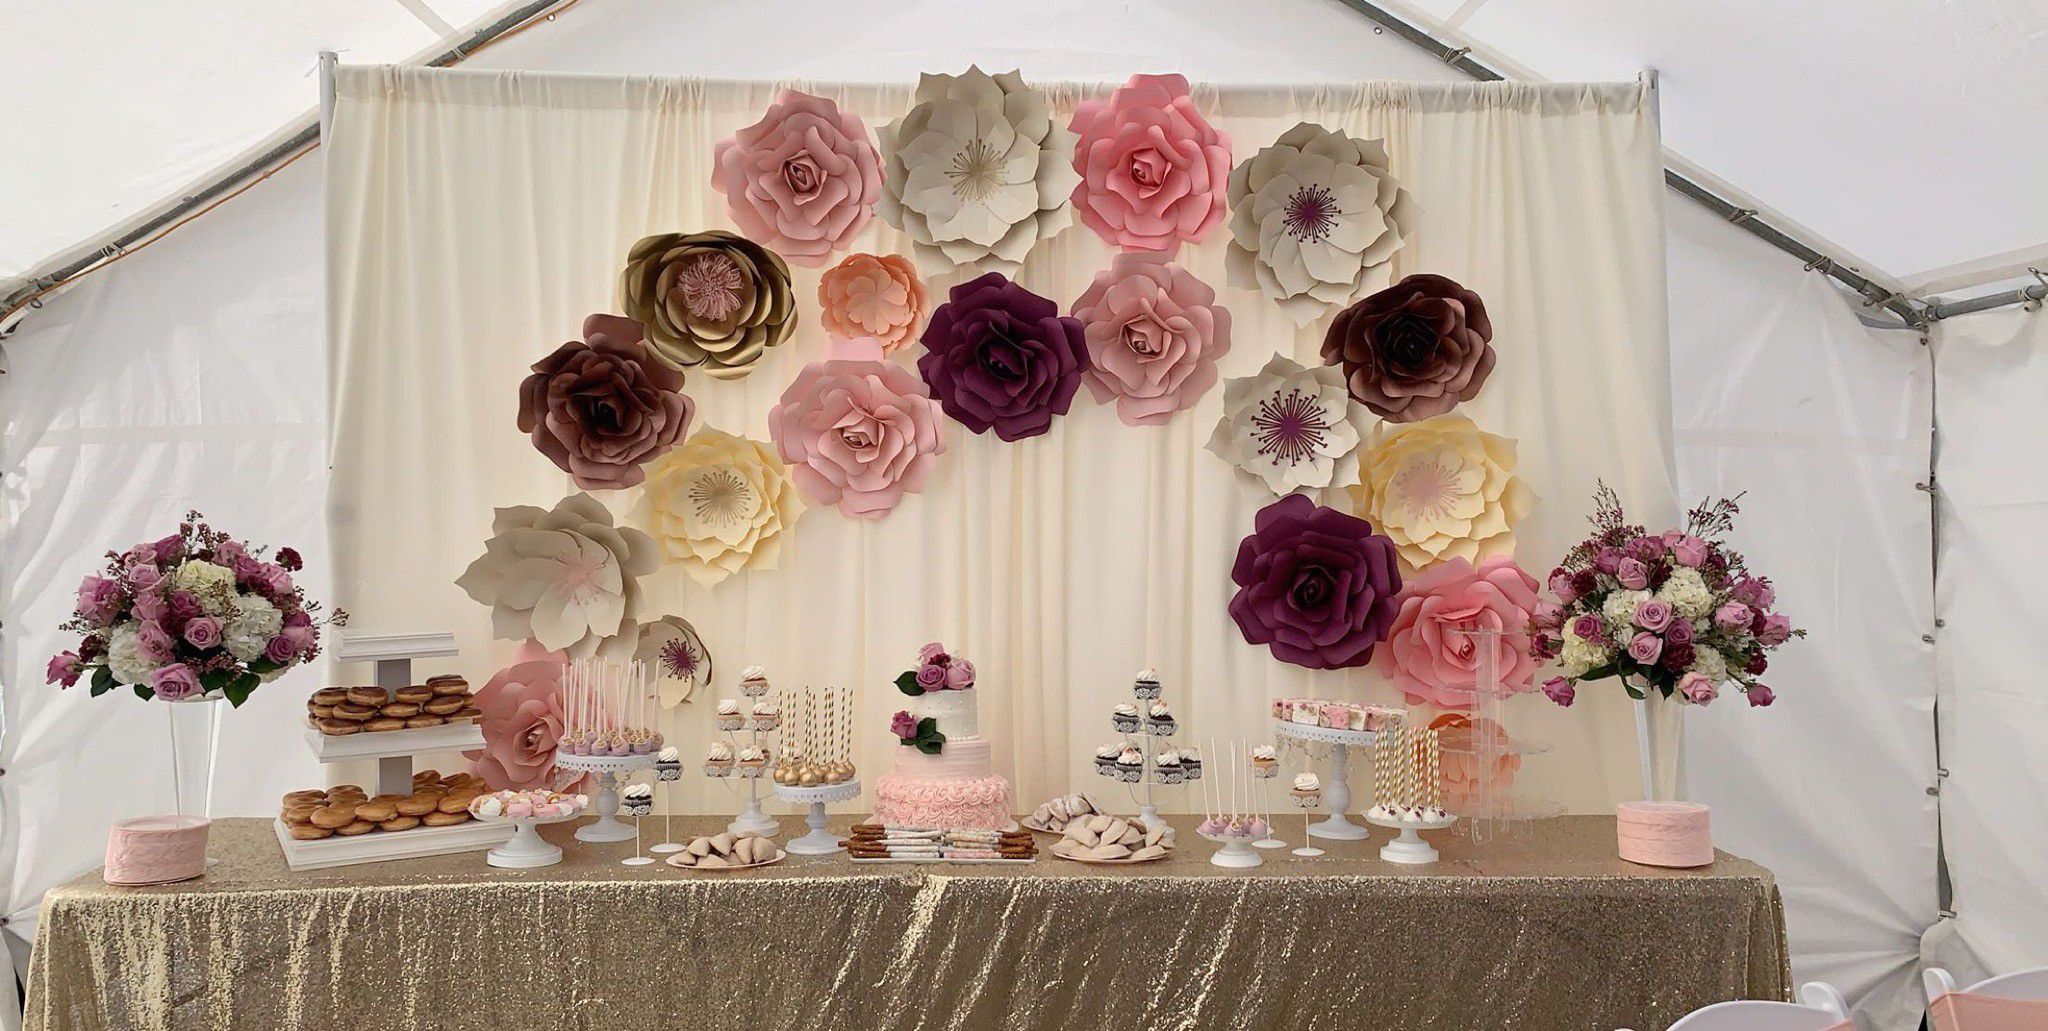 Paper flowers /cake table set up